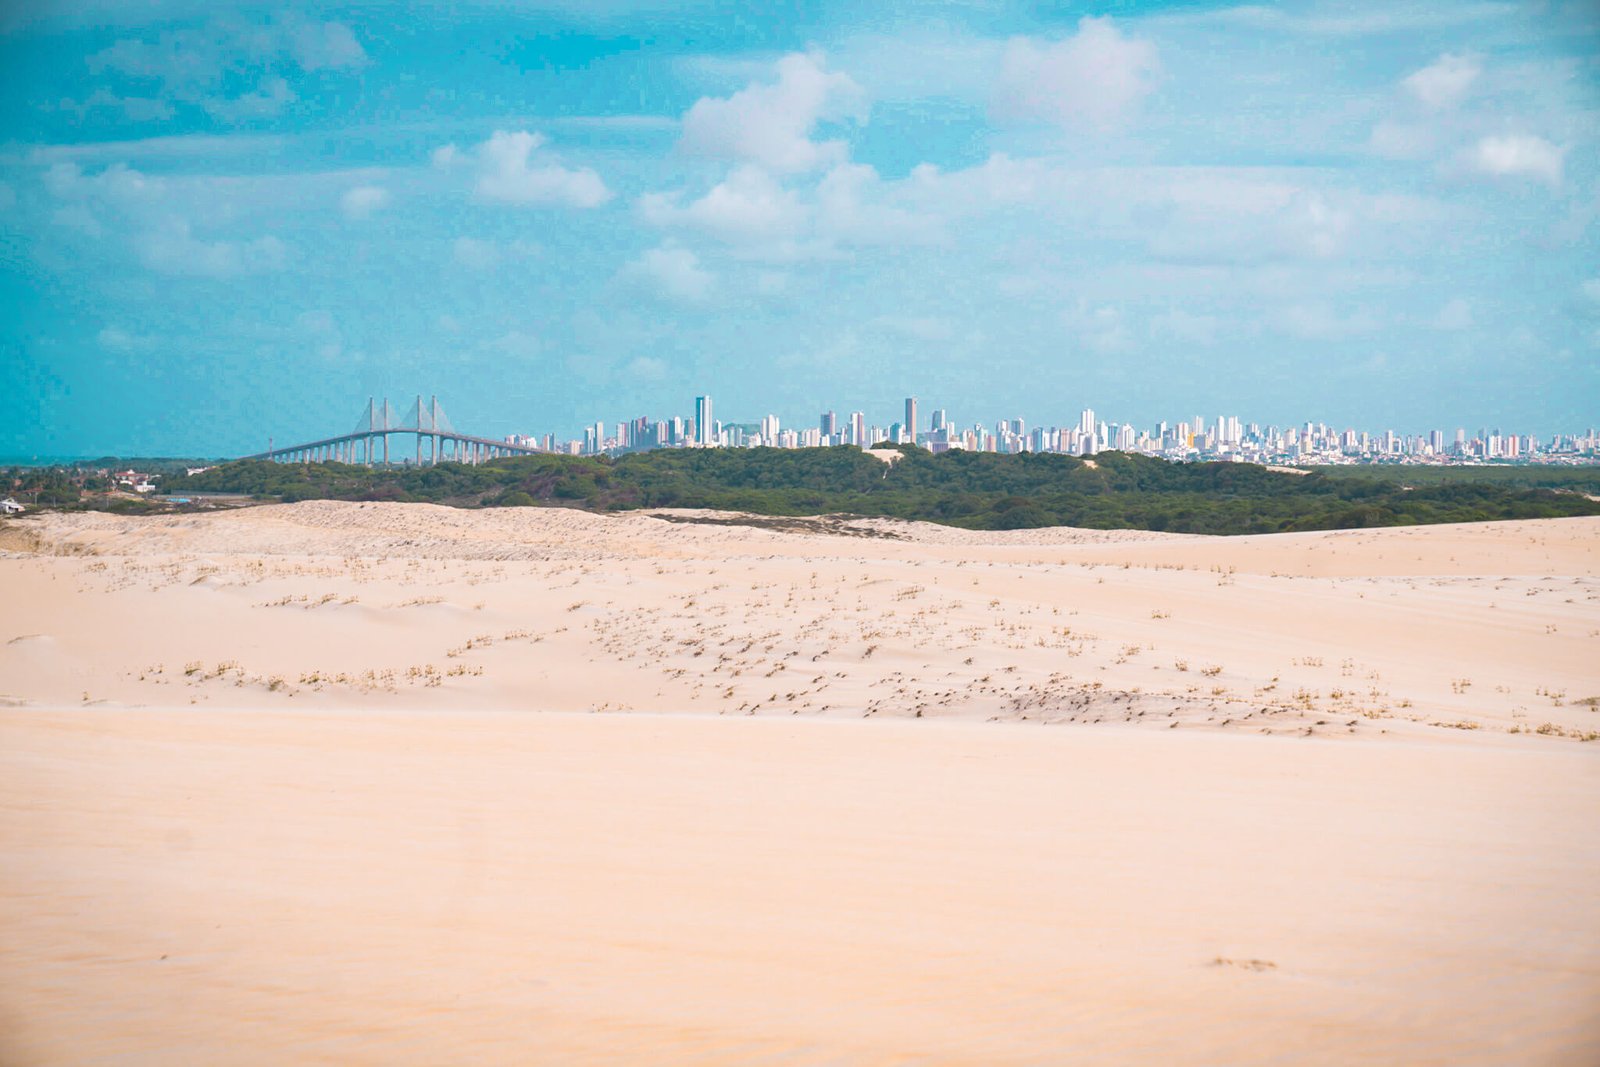 dune buggy tours, things to do in Natal, Brazil